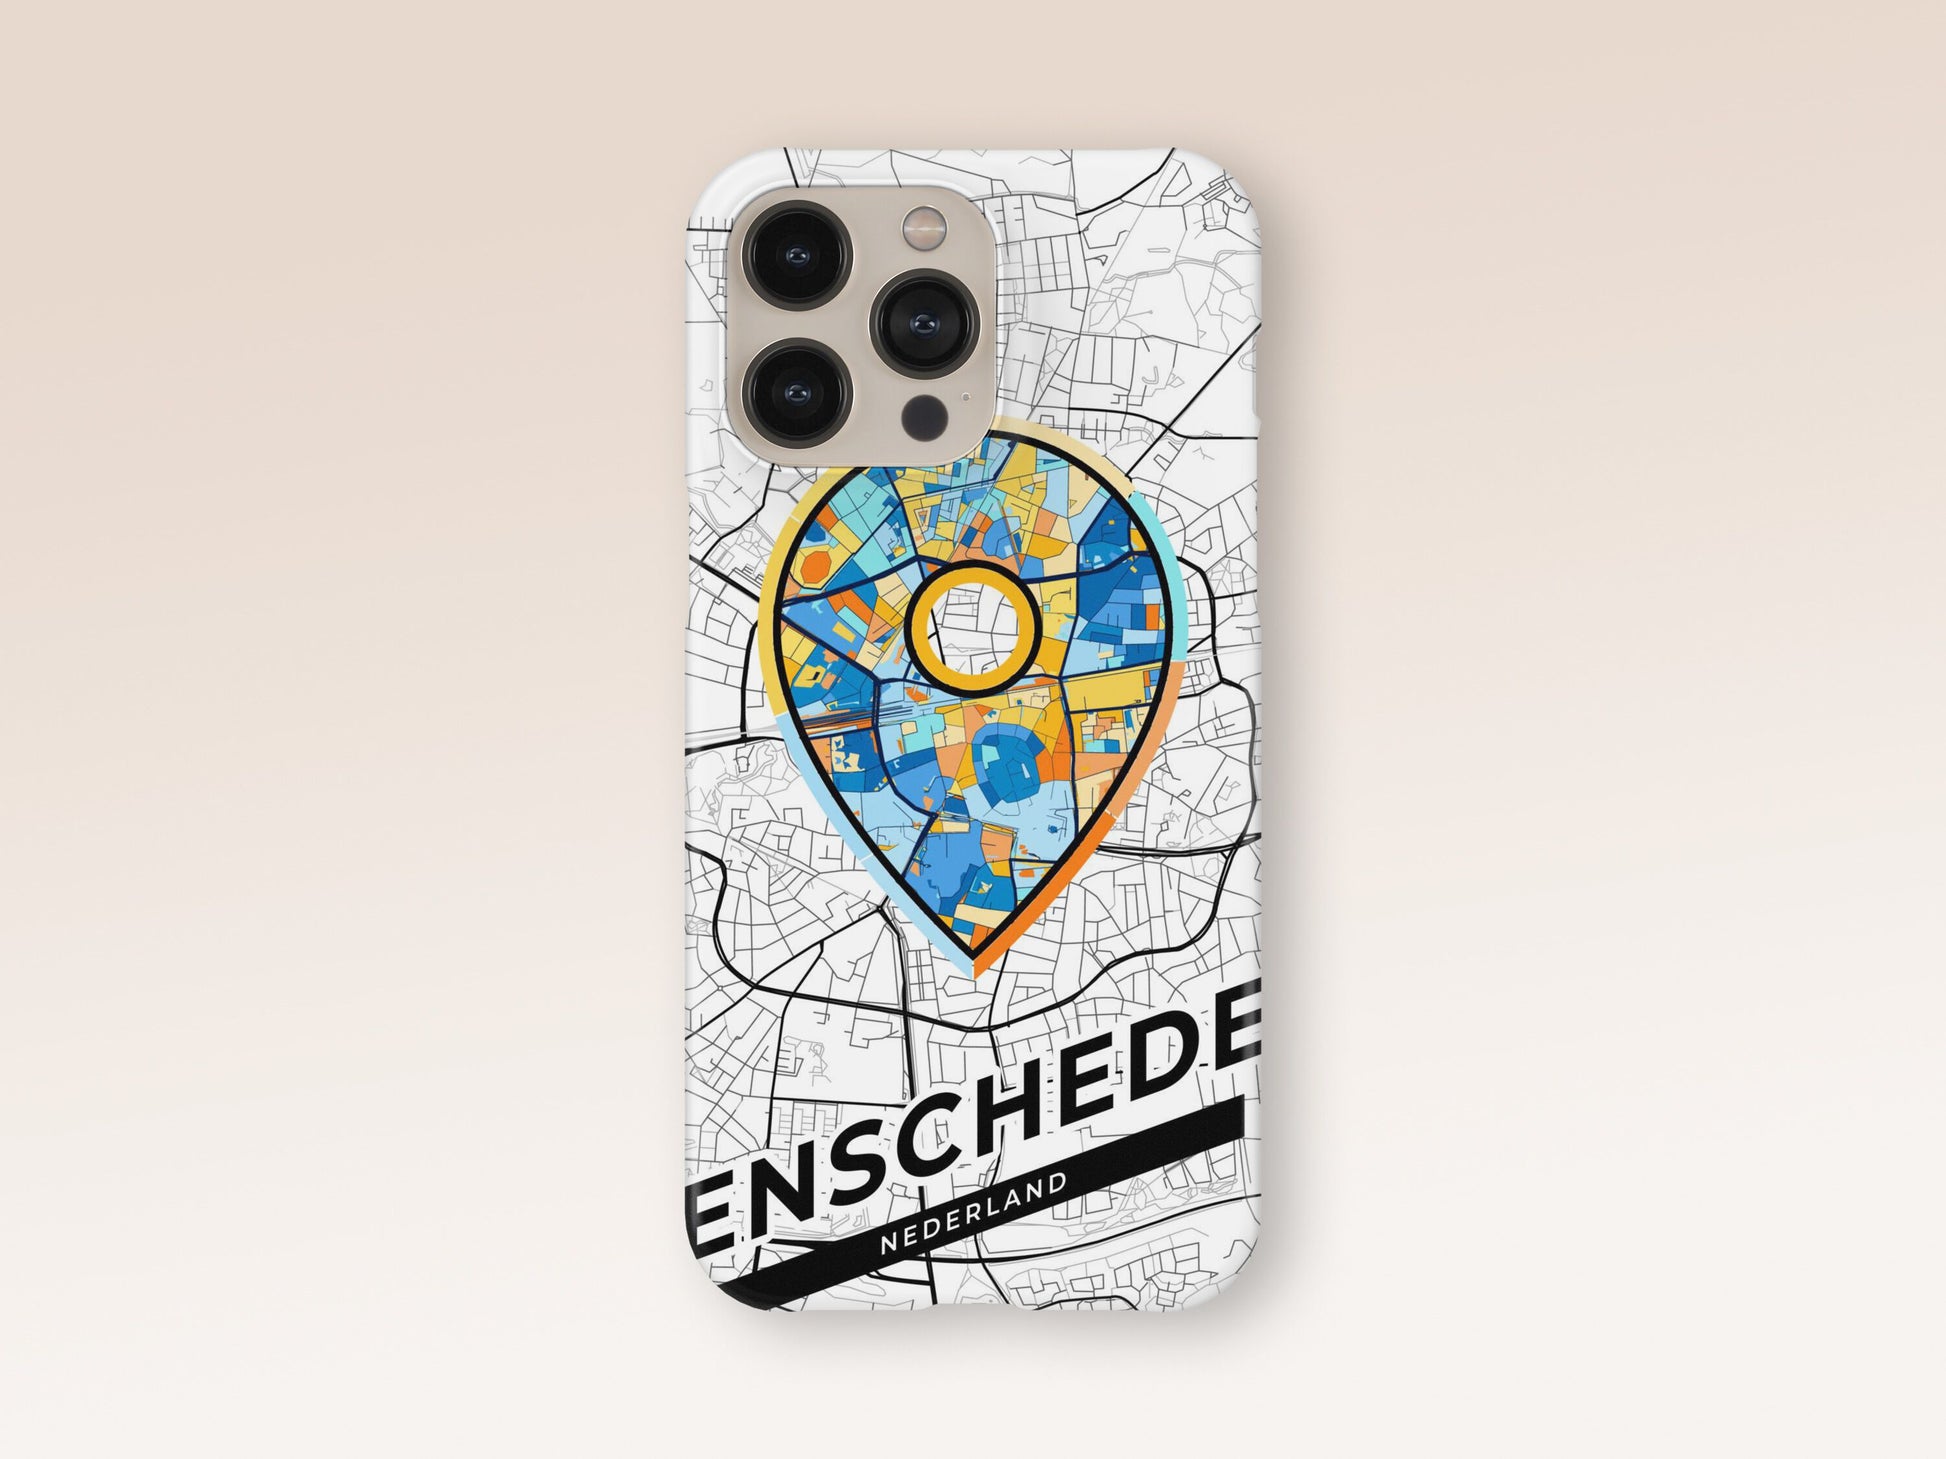 Enschede Netherlands slim phone case with colorful icon. Birthday, wedding or housewarming gift. Couple match cases. 1